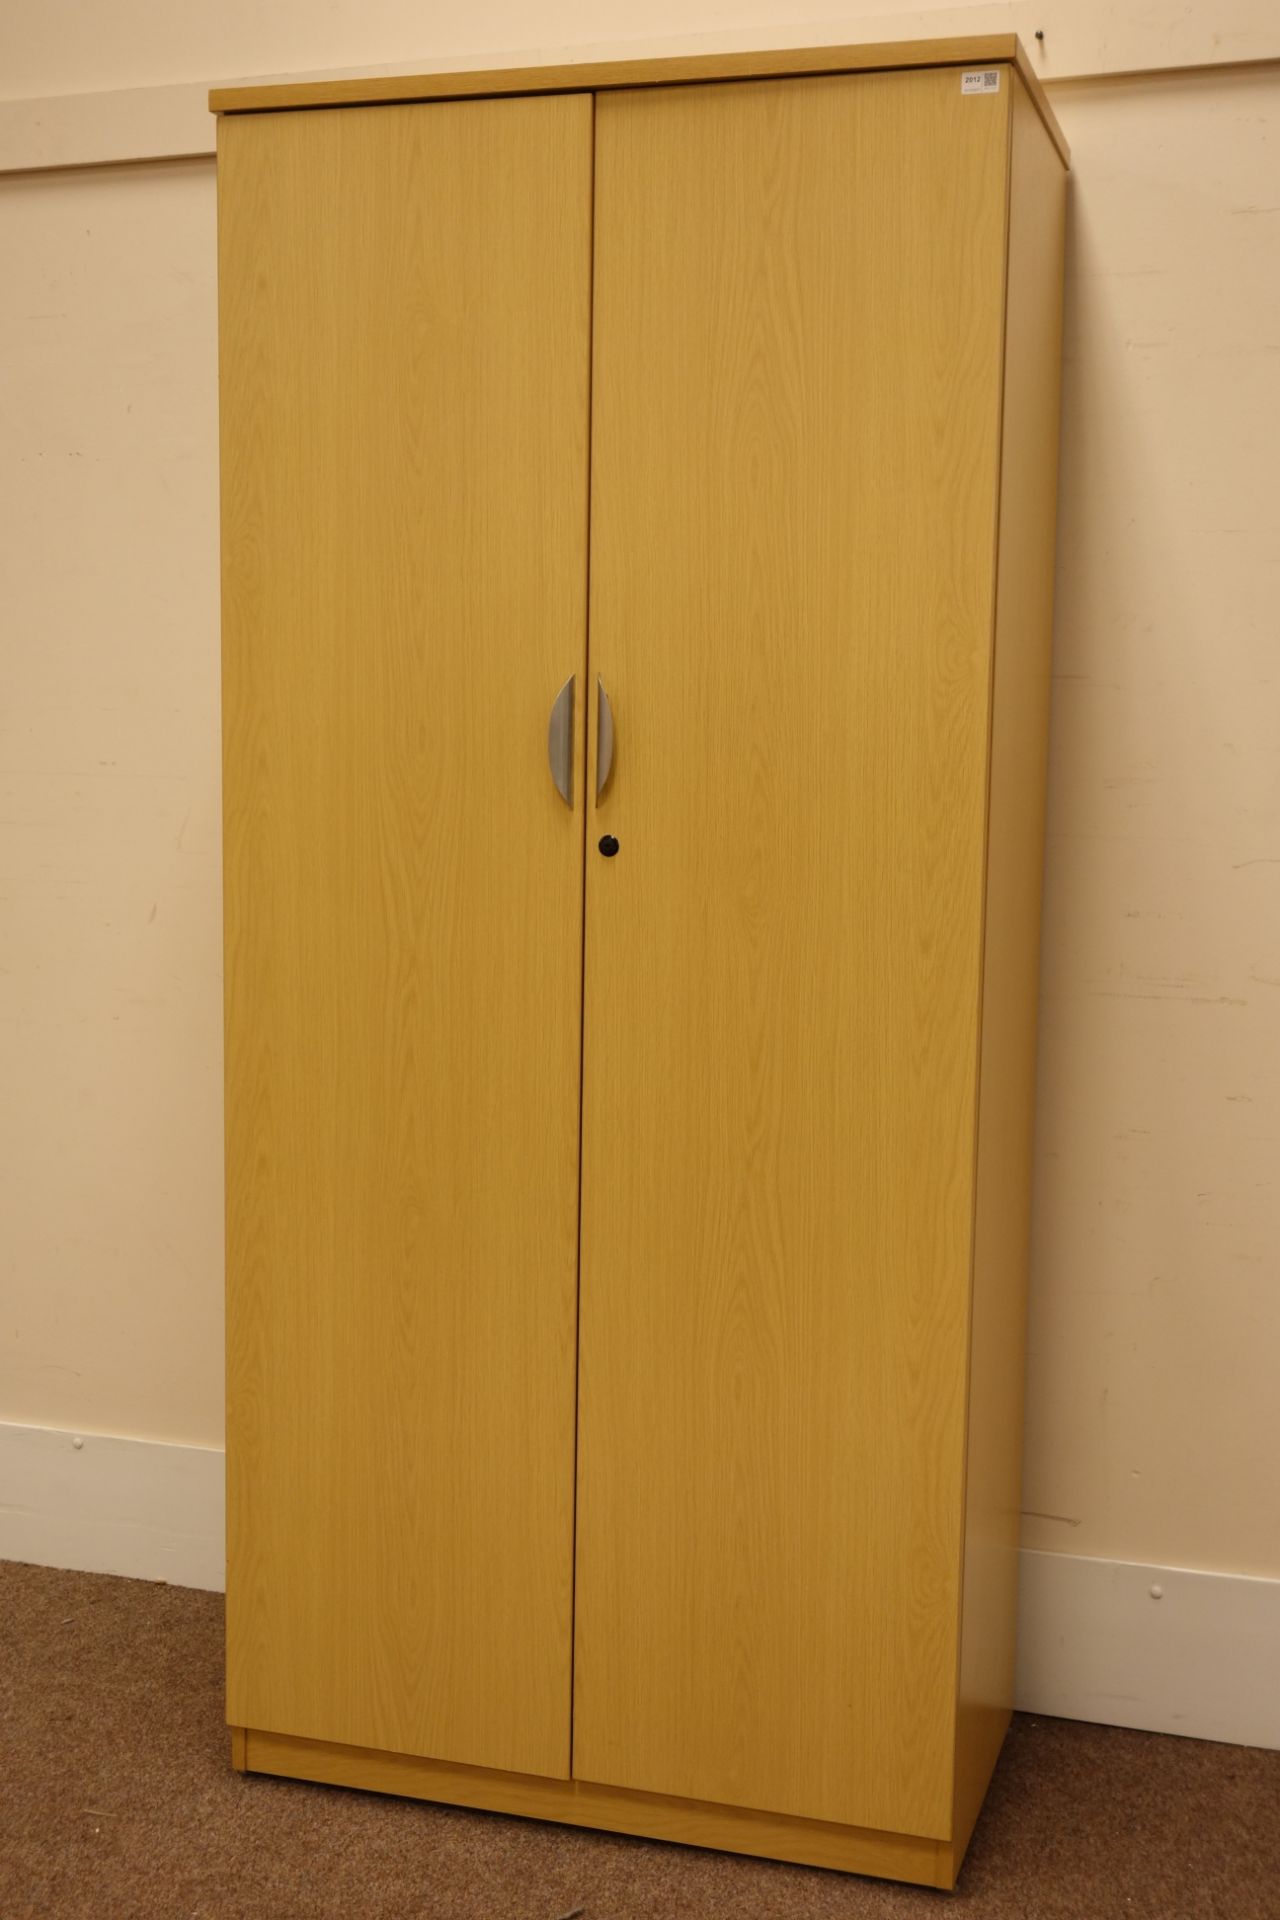 (STK10106) Large light oak finish lockable two door office storage cabinet fitted with adjustable